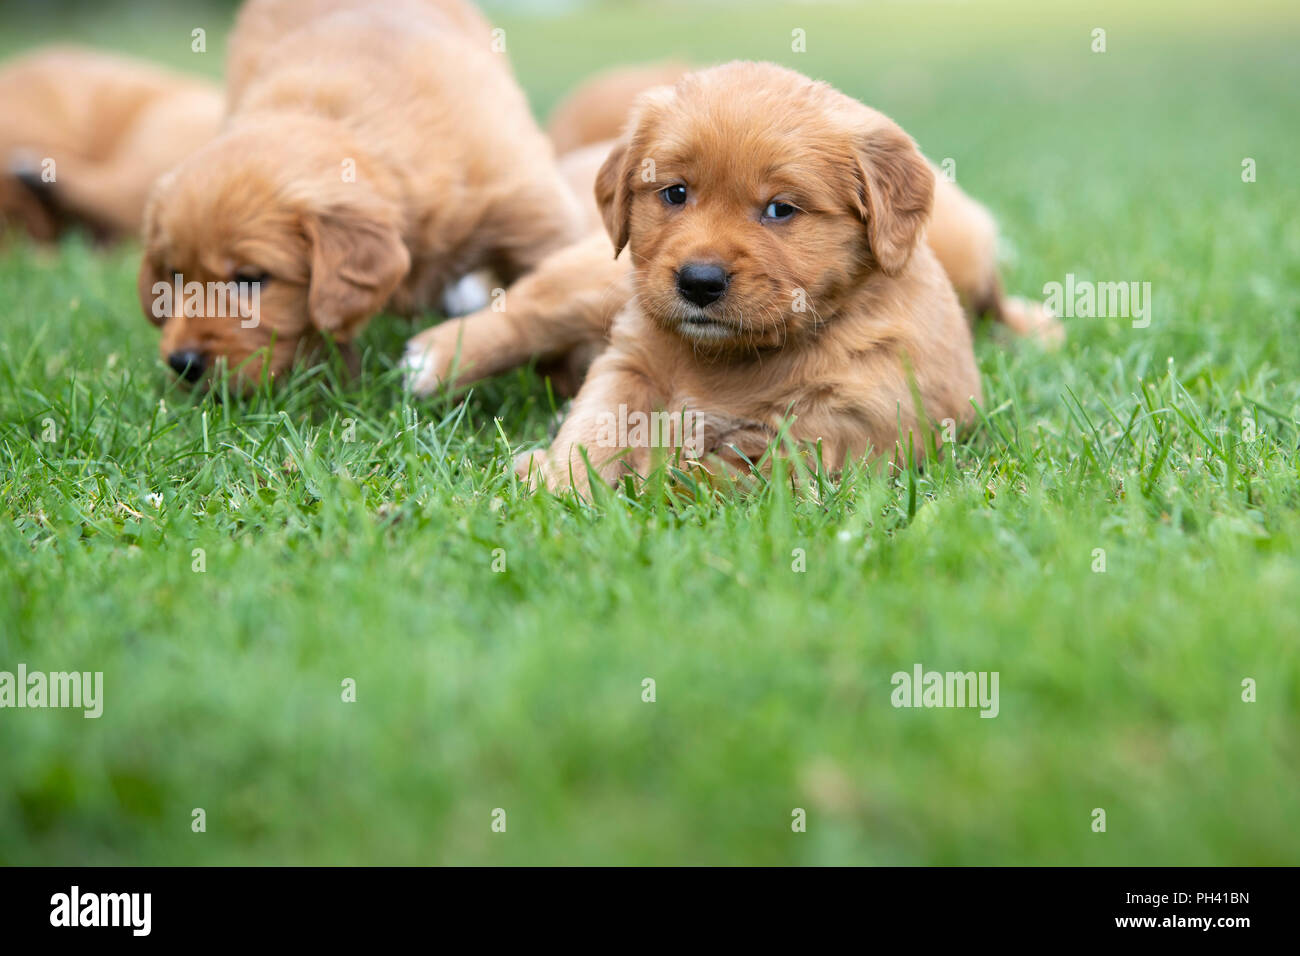 Two golden retriever puppies in the grass. Stock Photo